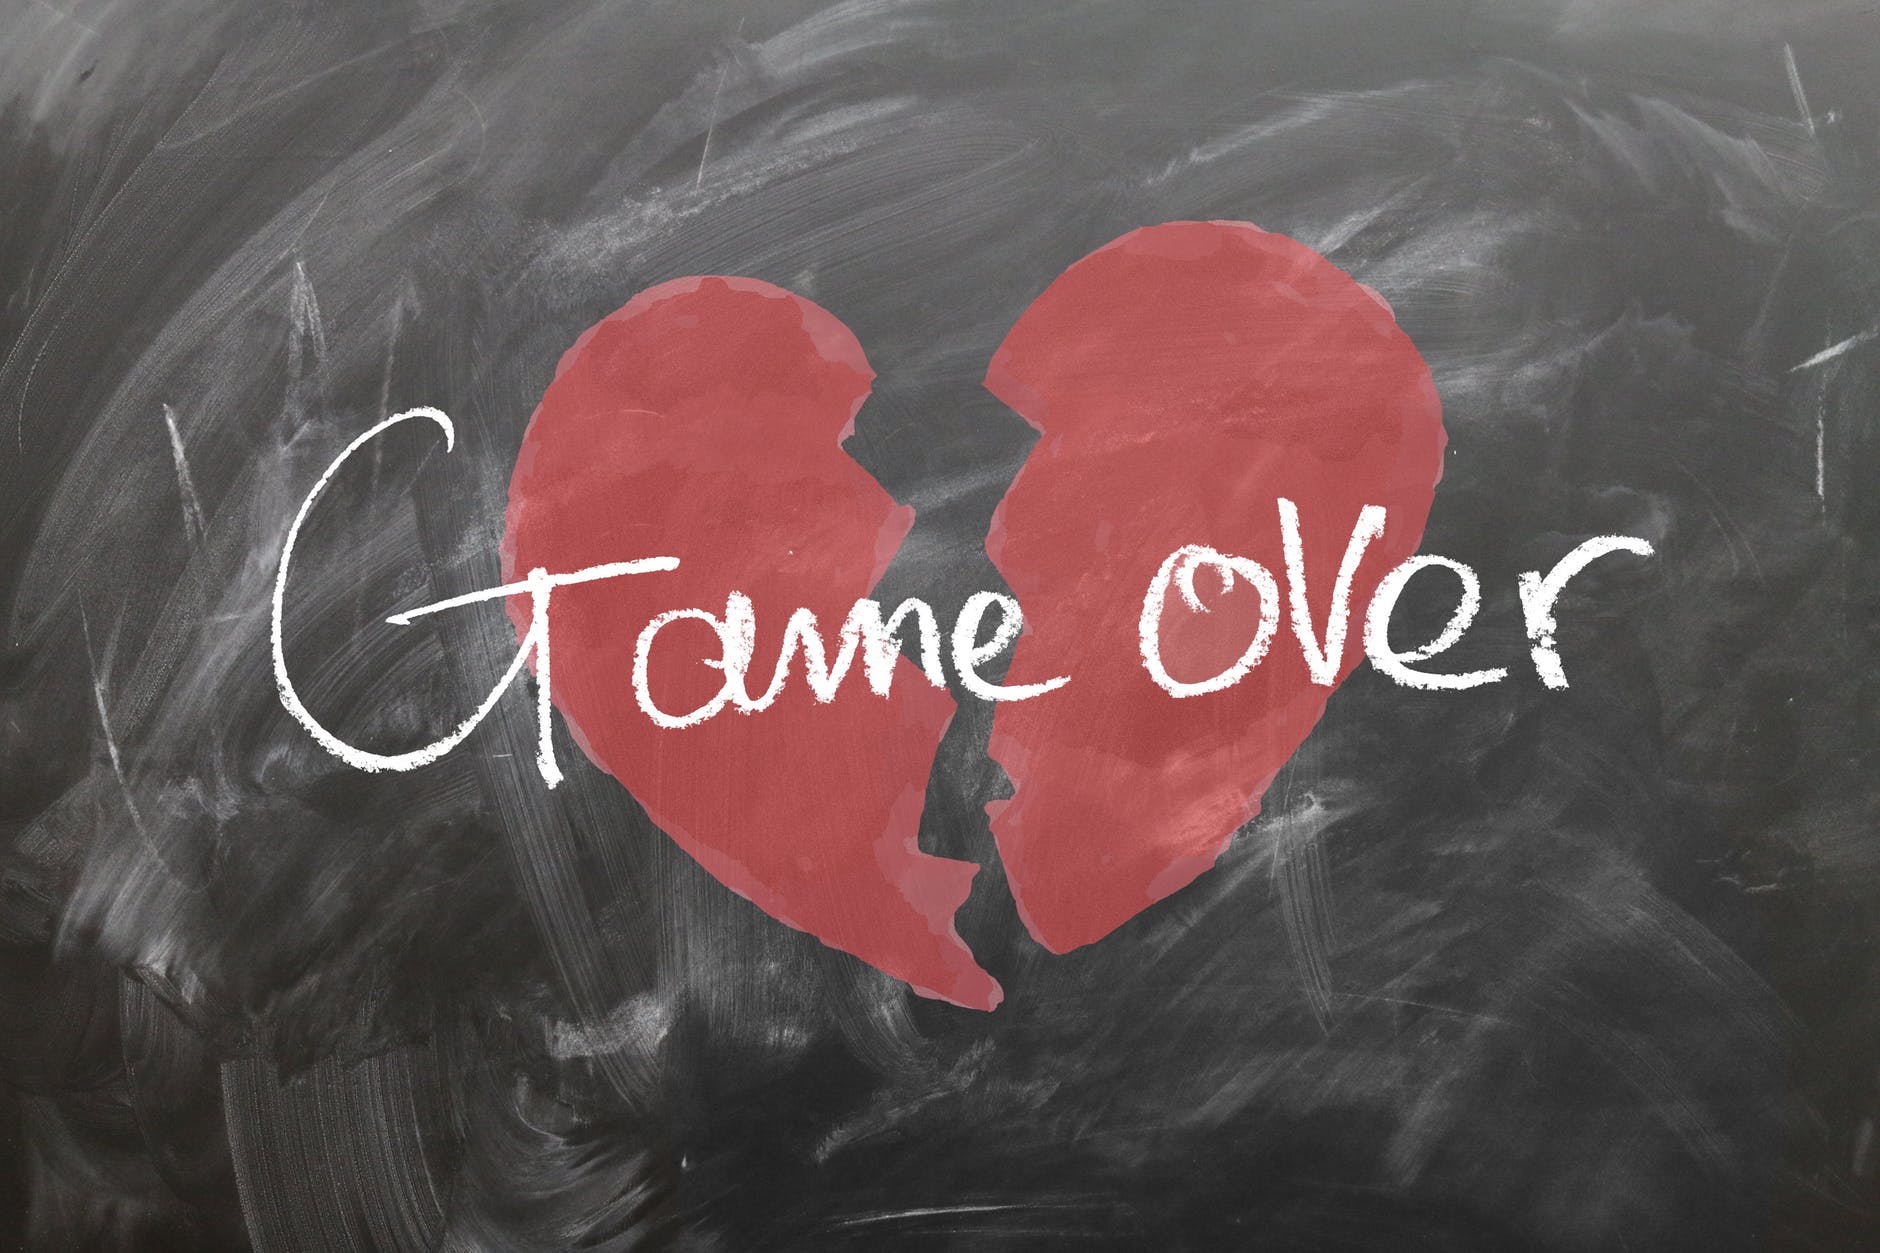 Broken heart and 'game over' on a chalkboard